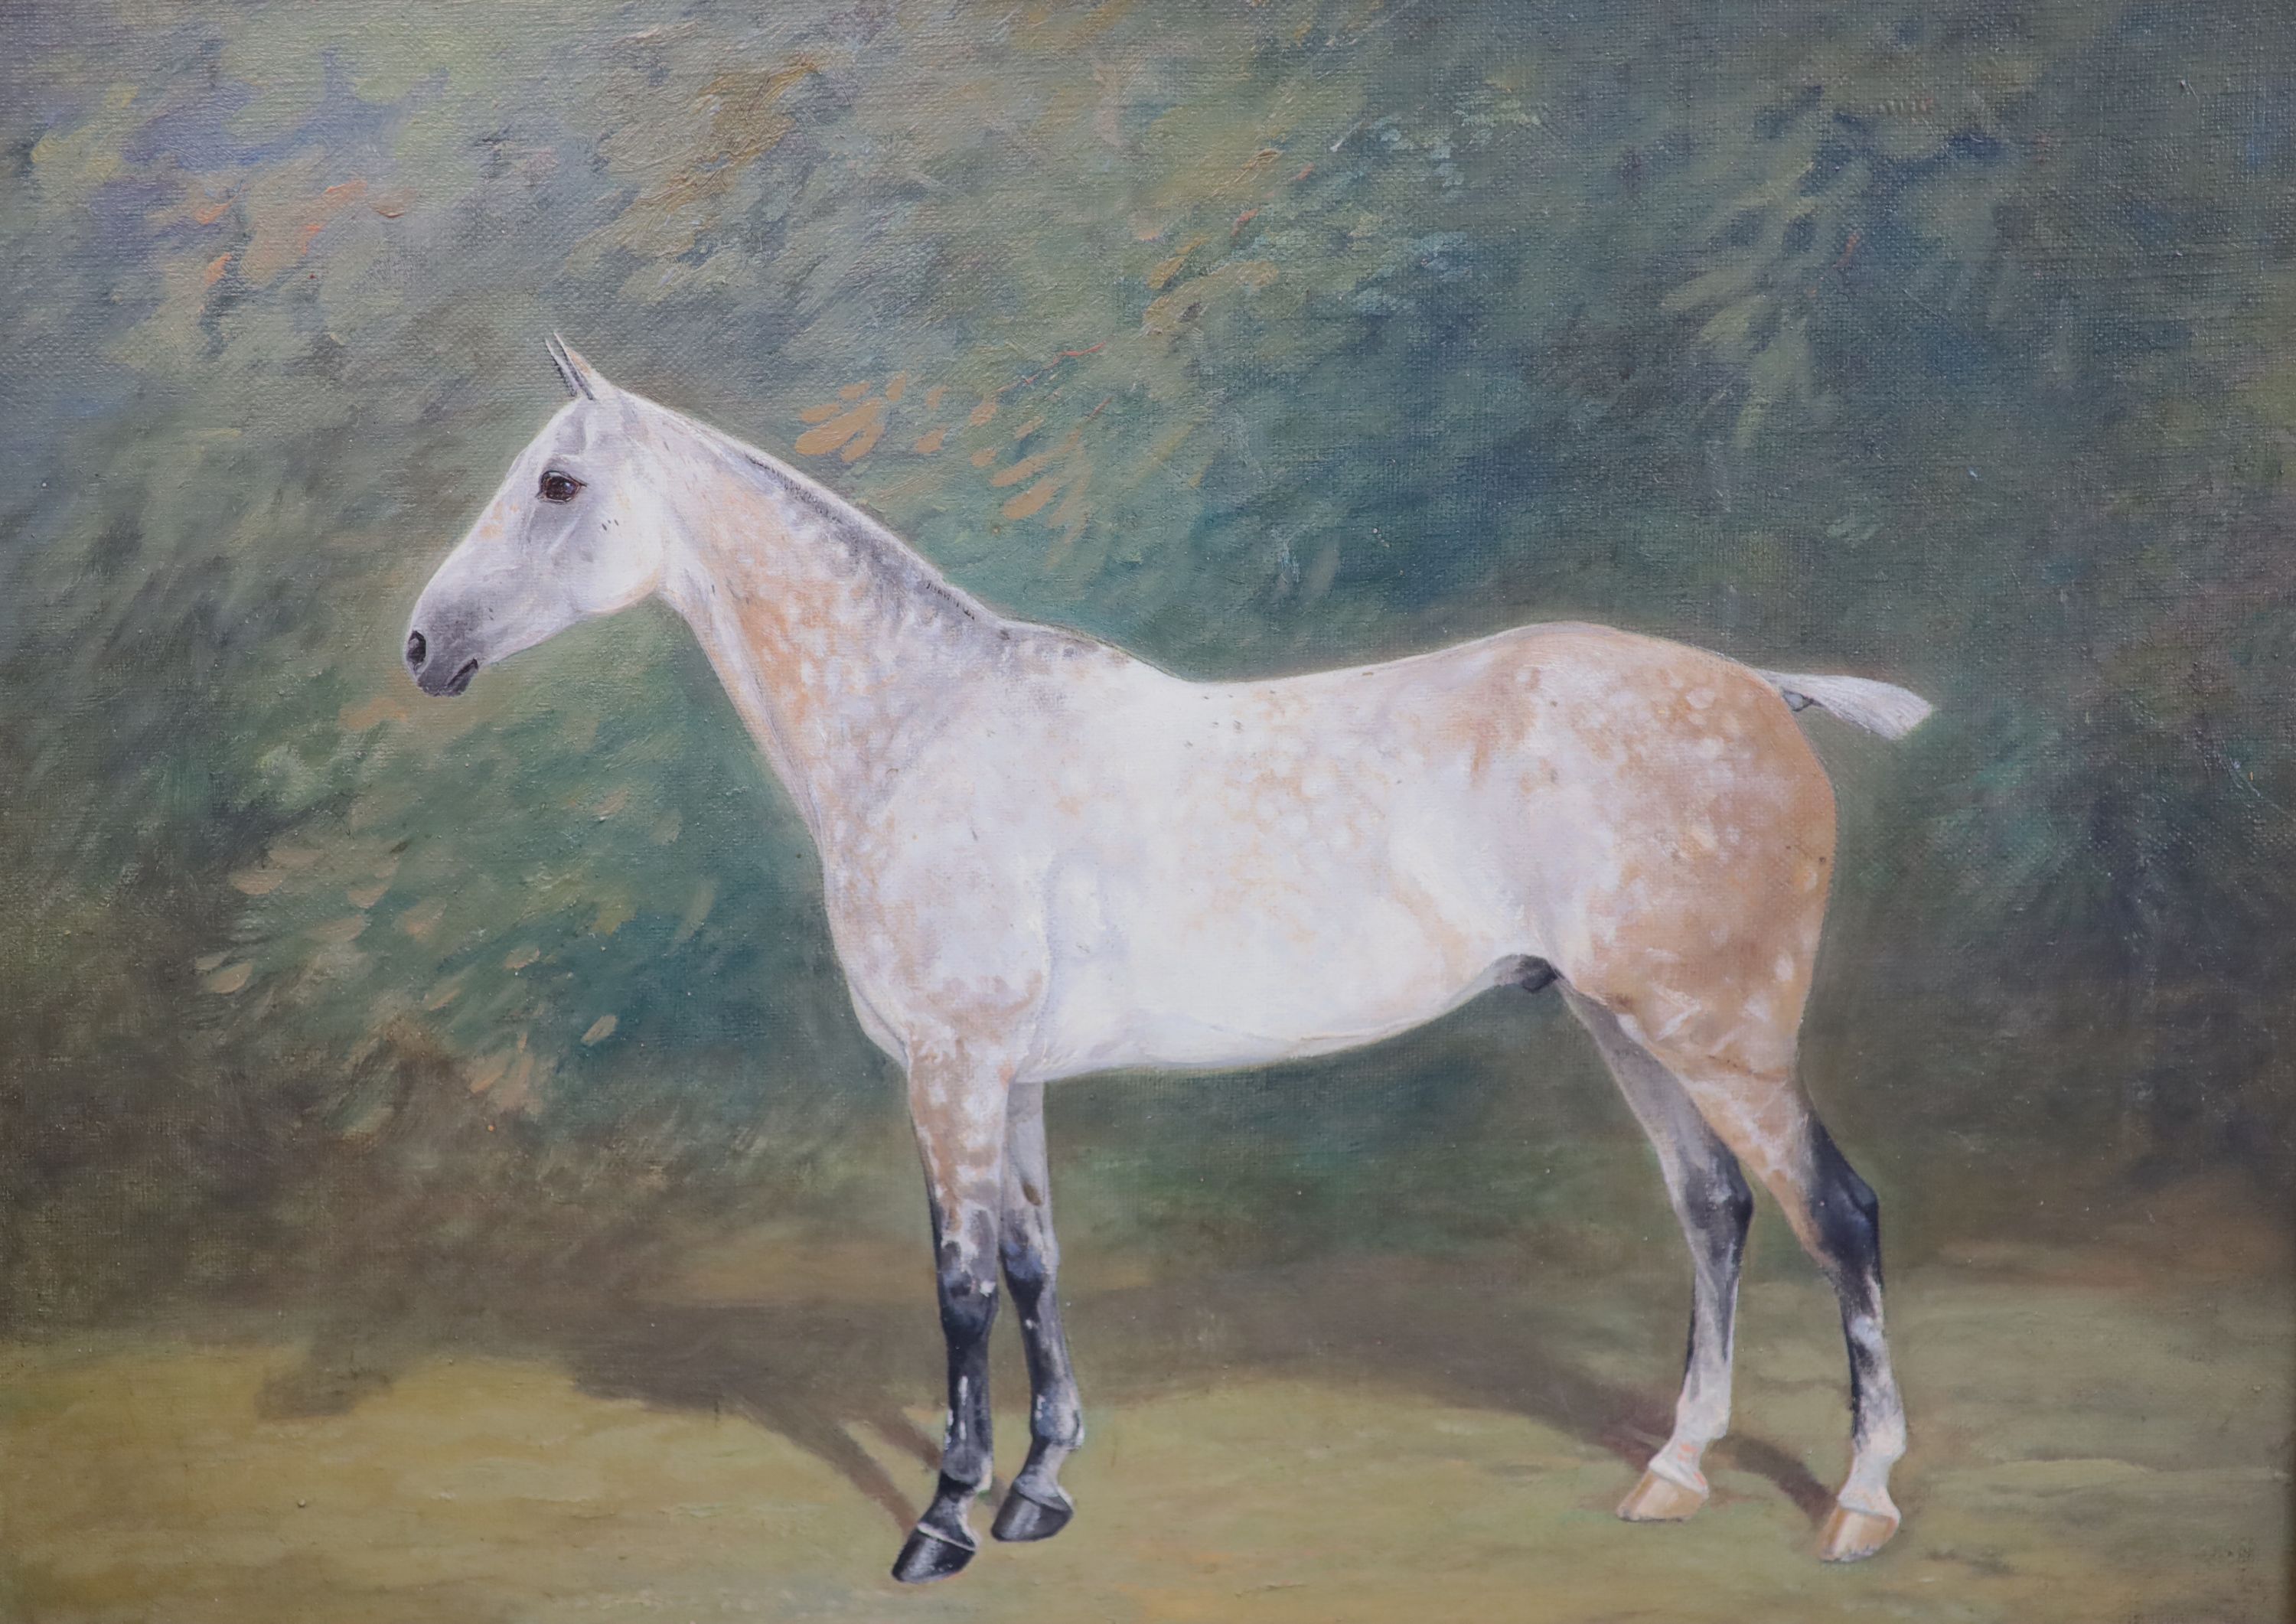 William Joseph Redworth (1873-1941), Portraits of Racehorses: Archdeacon, Chanois, Lord Dalmahoy and Niger, set of 4 oils on canvas, 30 x 39.5cm